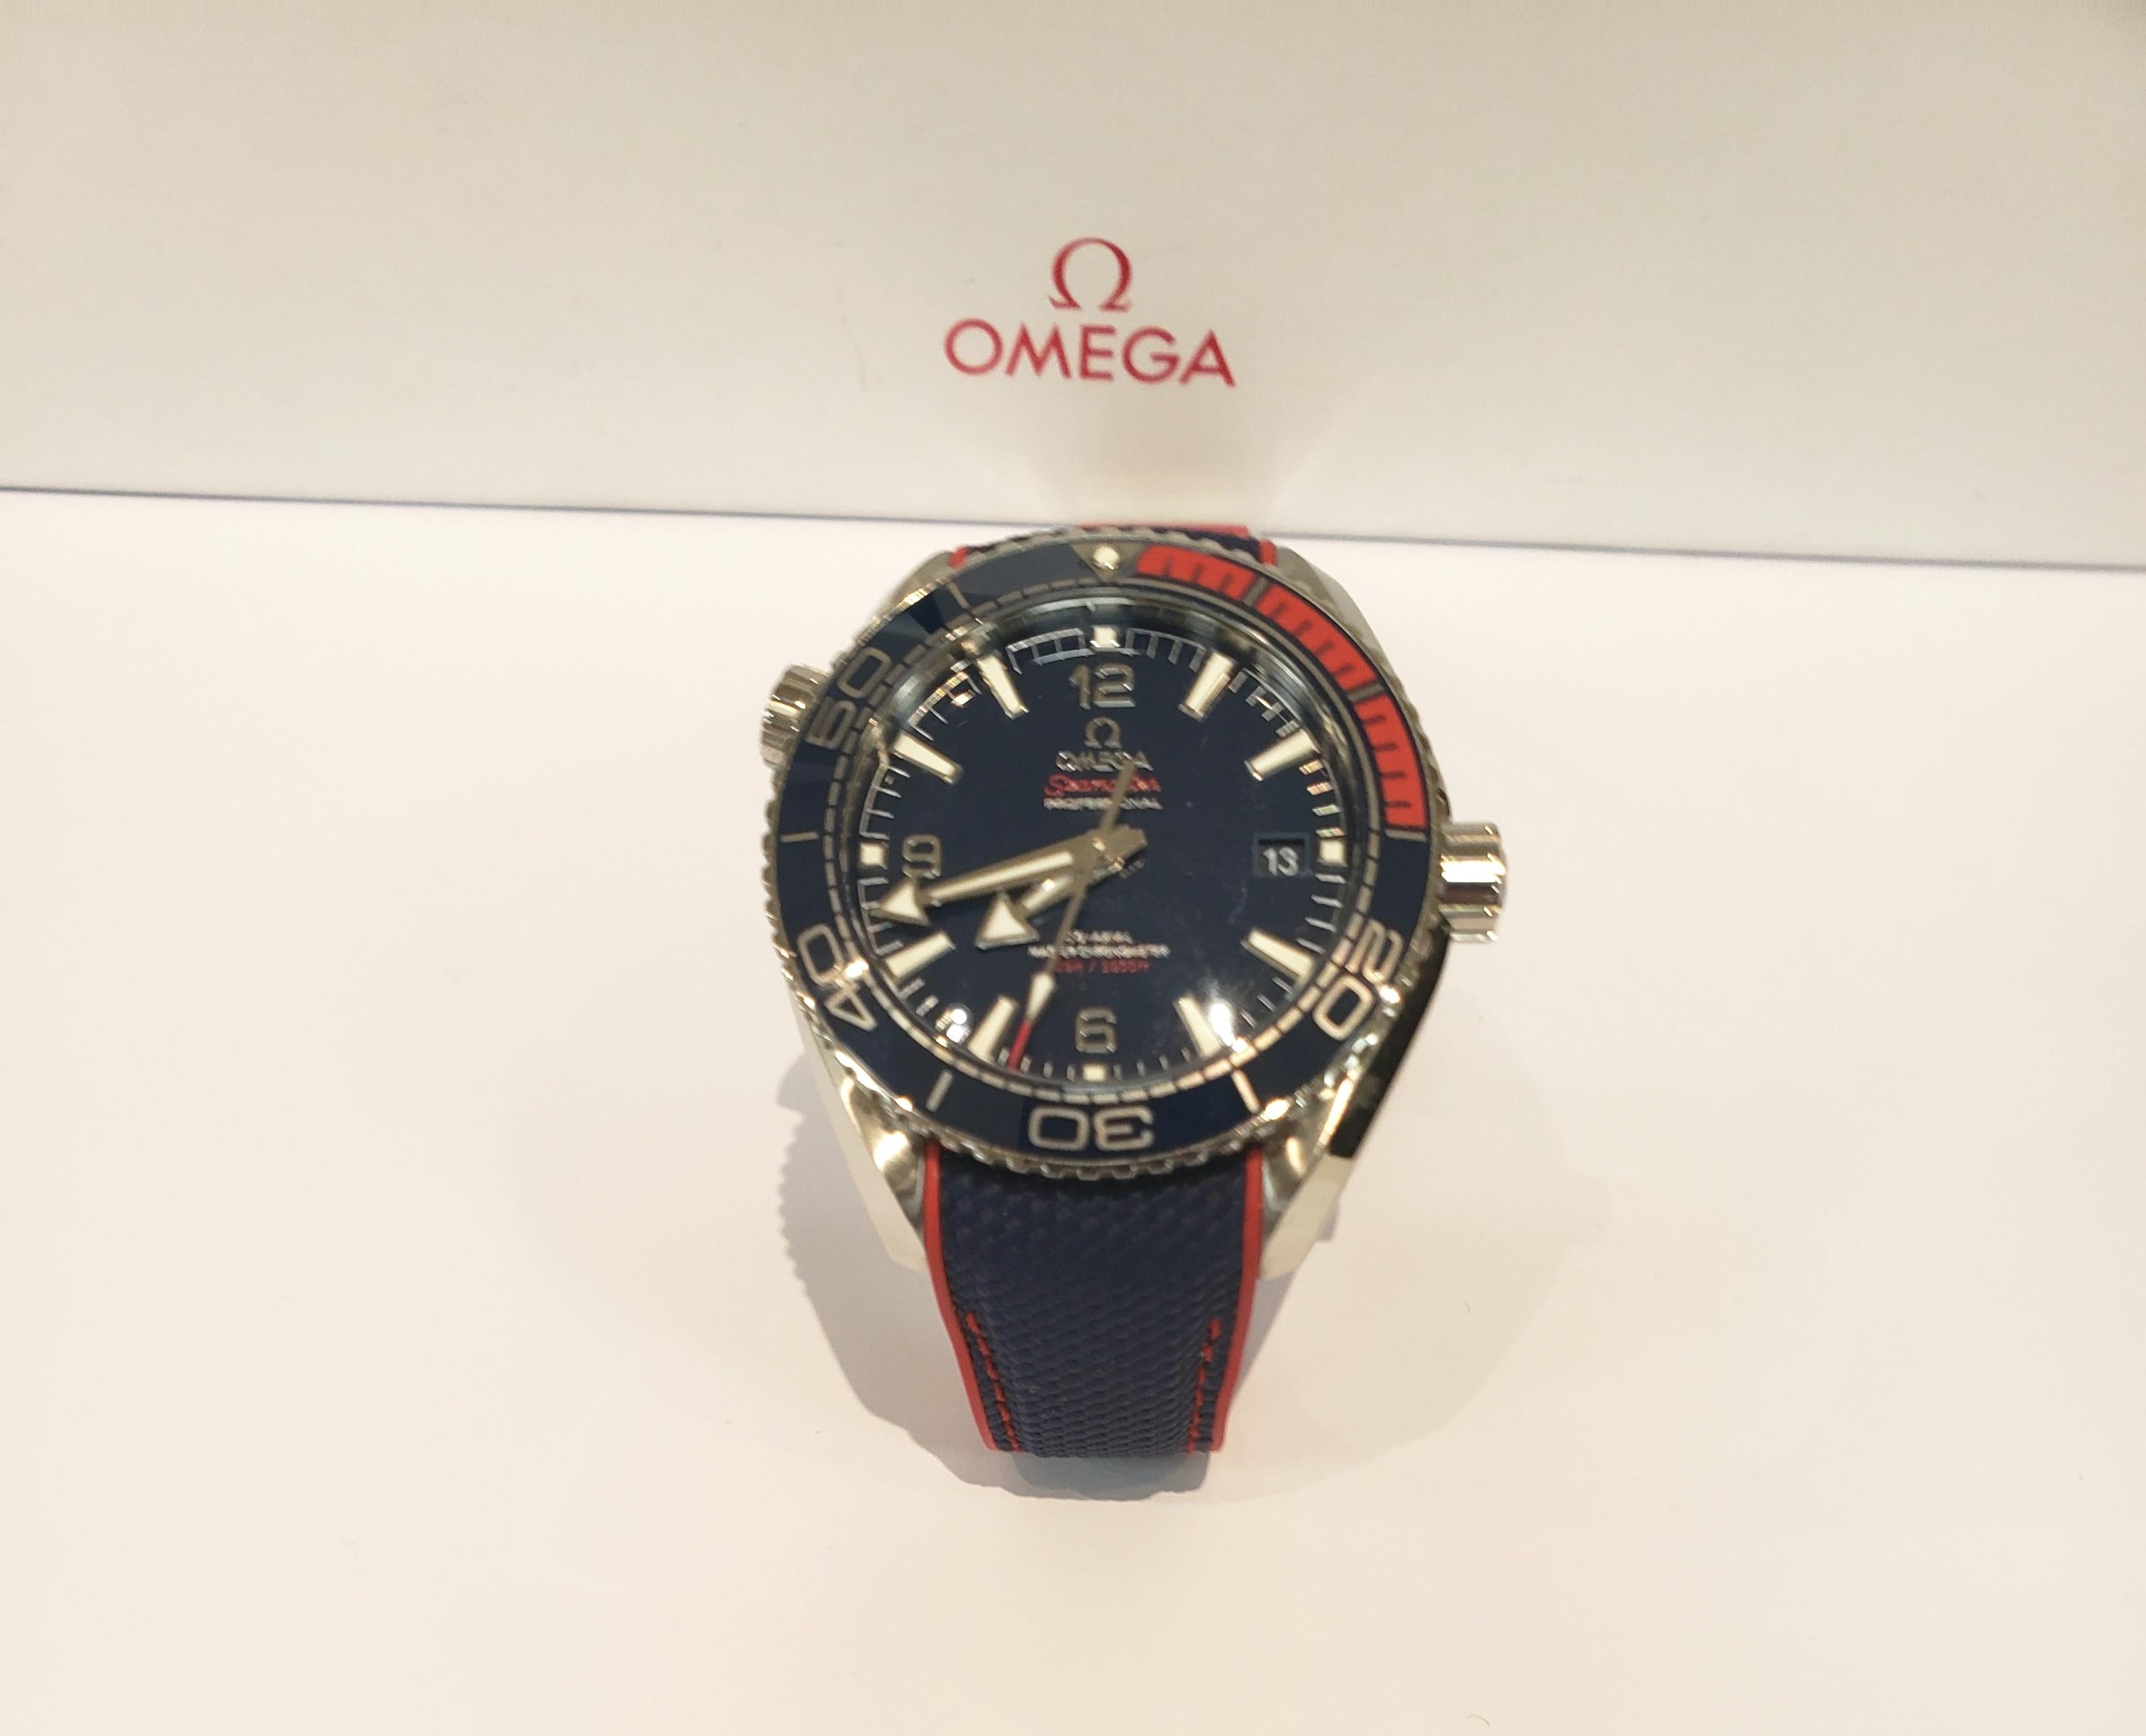 A Commemorative Limited Edition Omega Sea Master Planet Ocean 2018 Olympic Games Watch. 43.5 Millimeter, Stainless Steel Case With Blue Dial With Red Accents. Automatic Movement. Co-Axial Master Chronometer. Skeleton Back. Water Resistant To 200